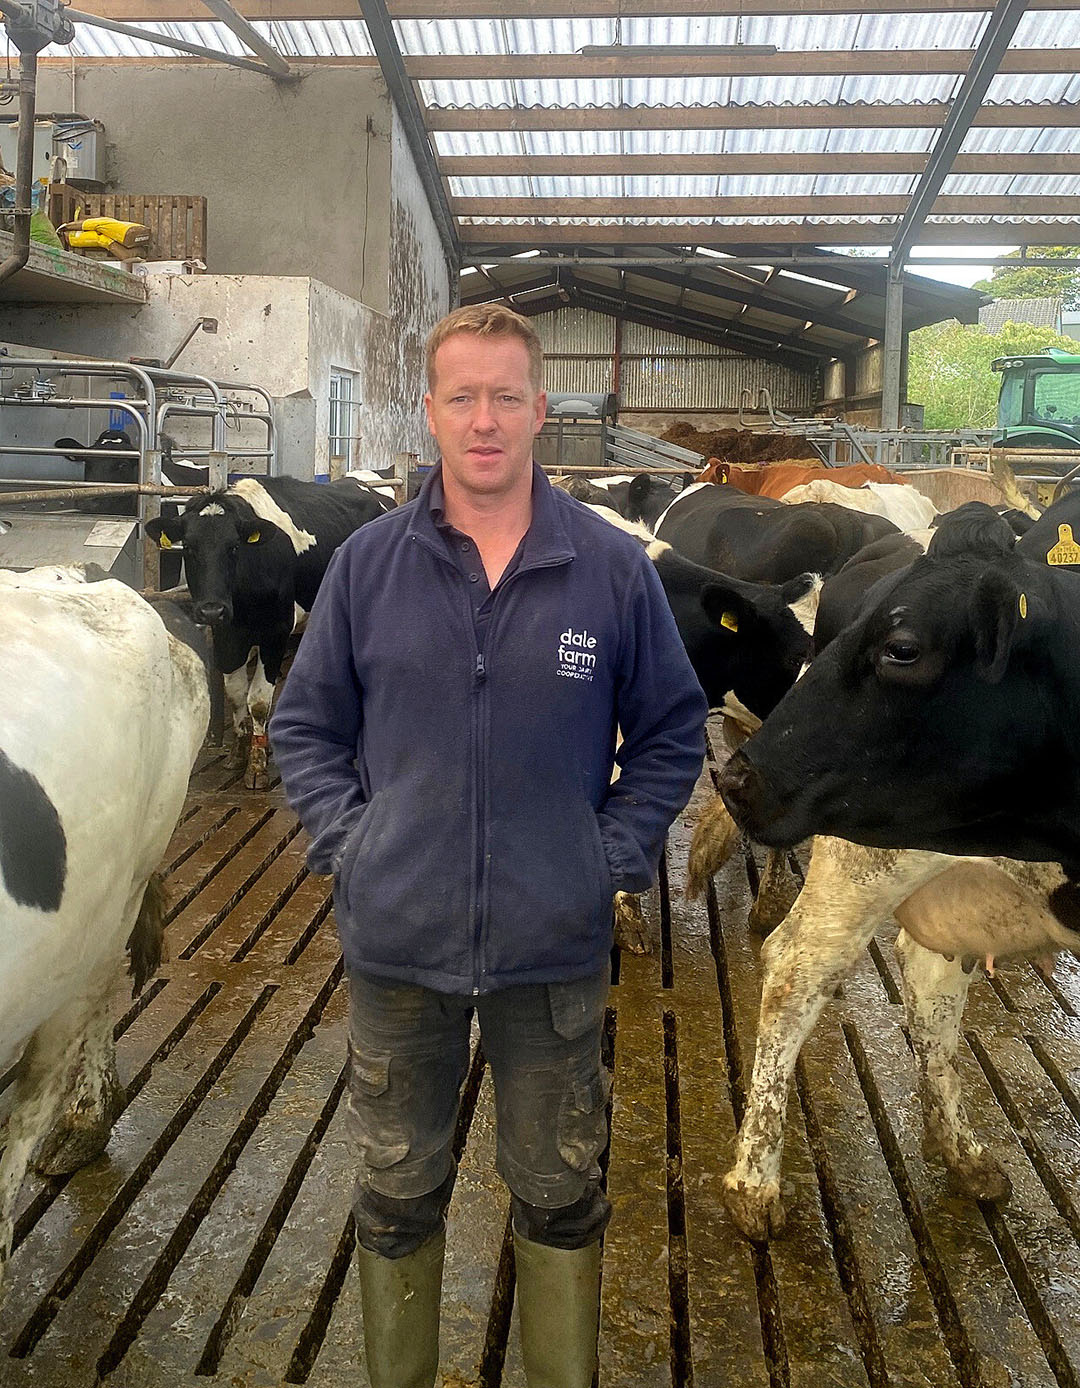 Northern Ireland dairy farmer Paul Smyth is now distributing the transparent sheeting worldwide. Photo: Chris McCullough